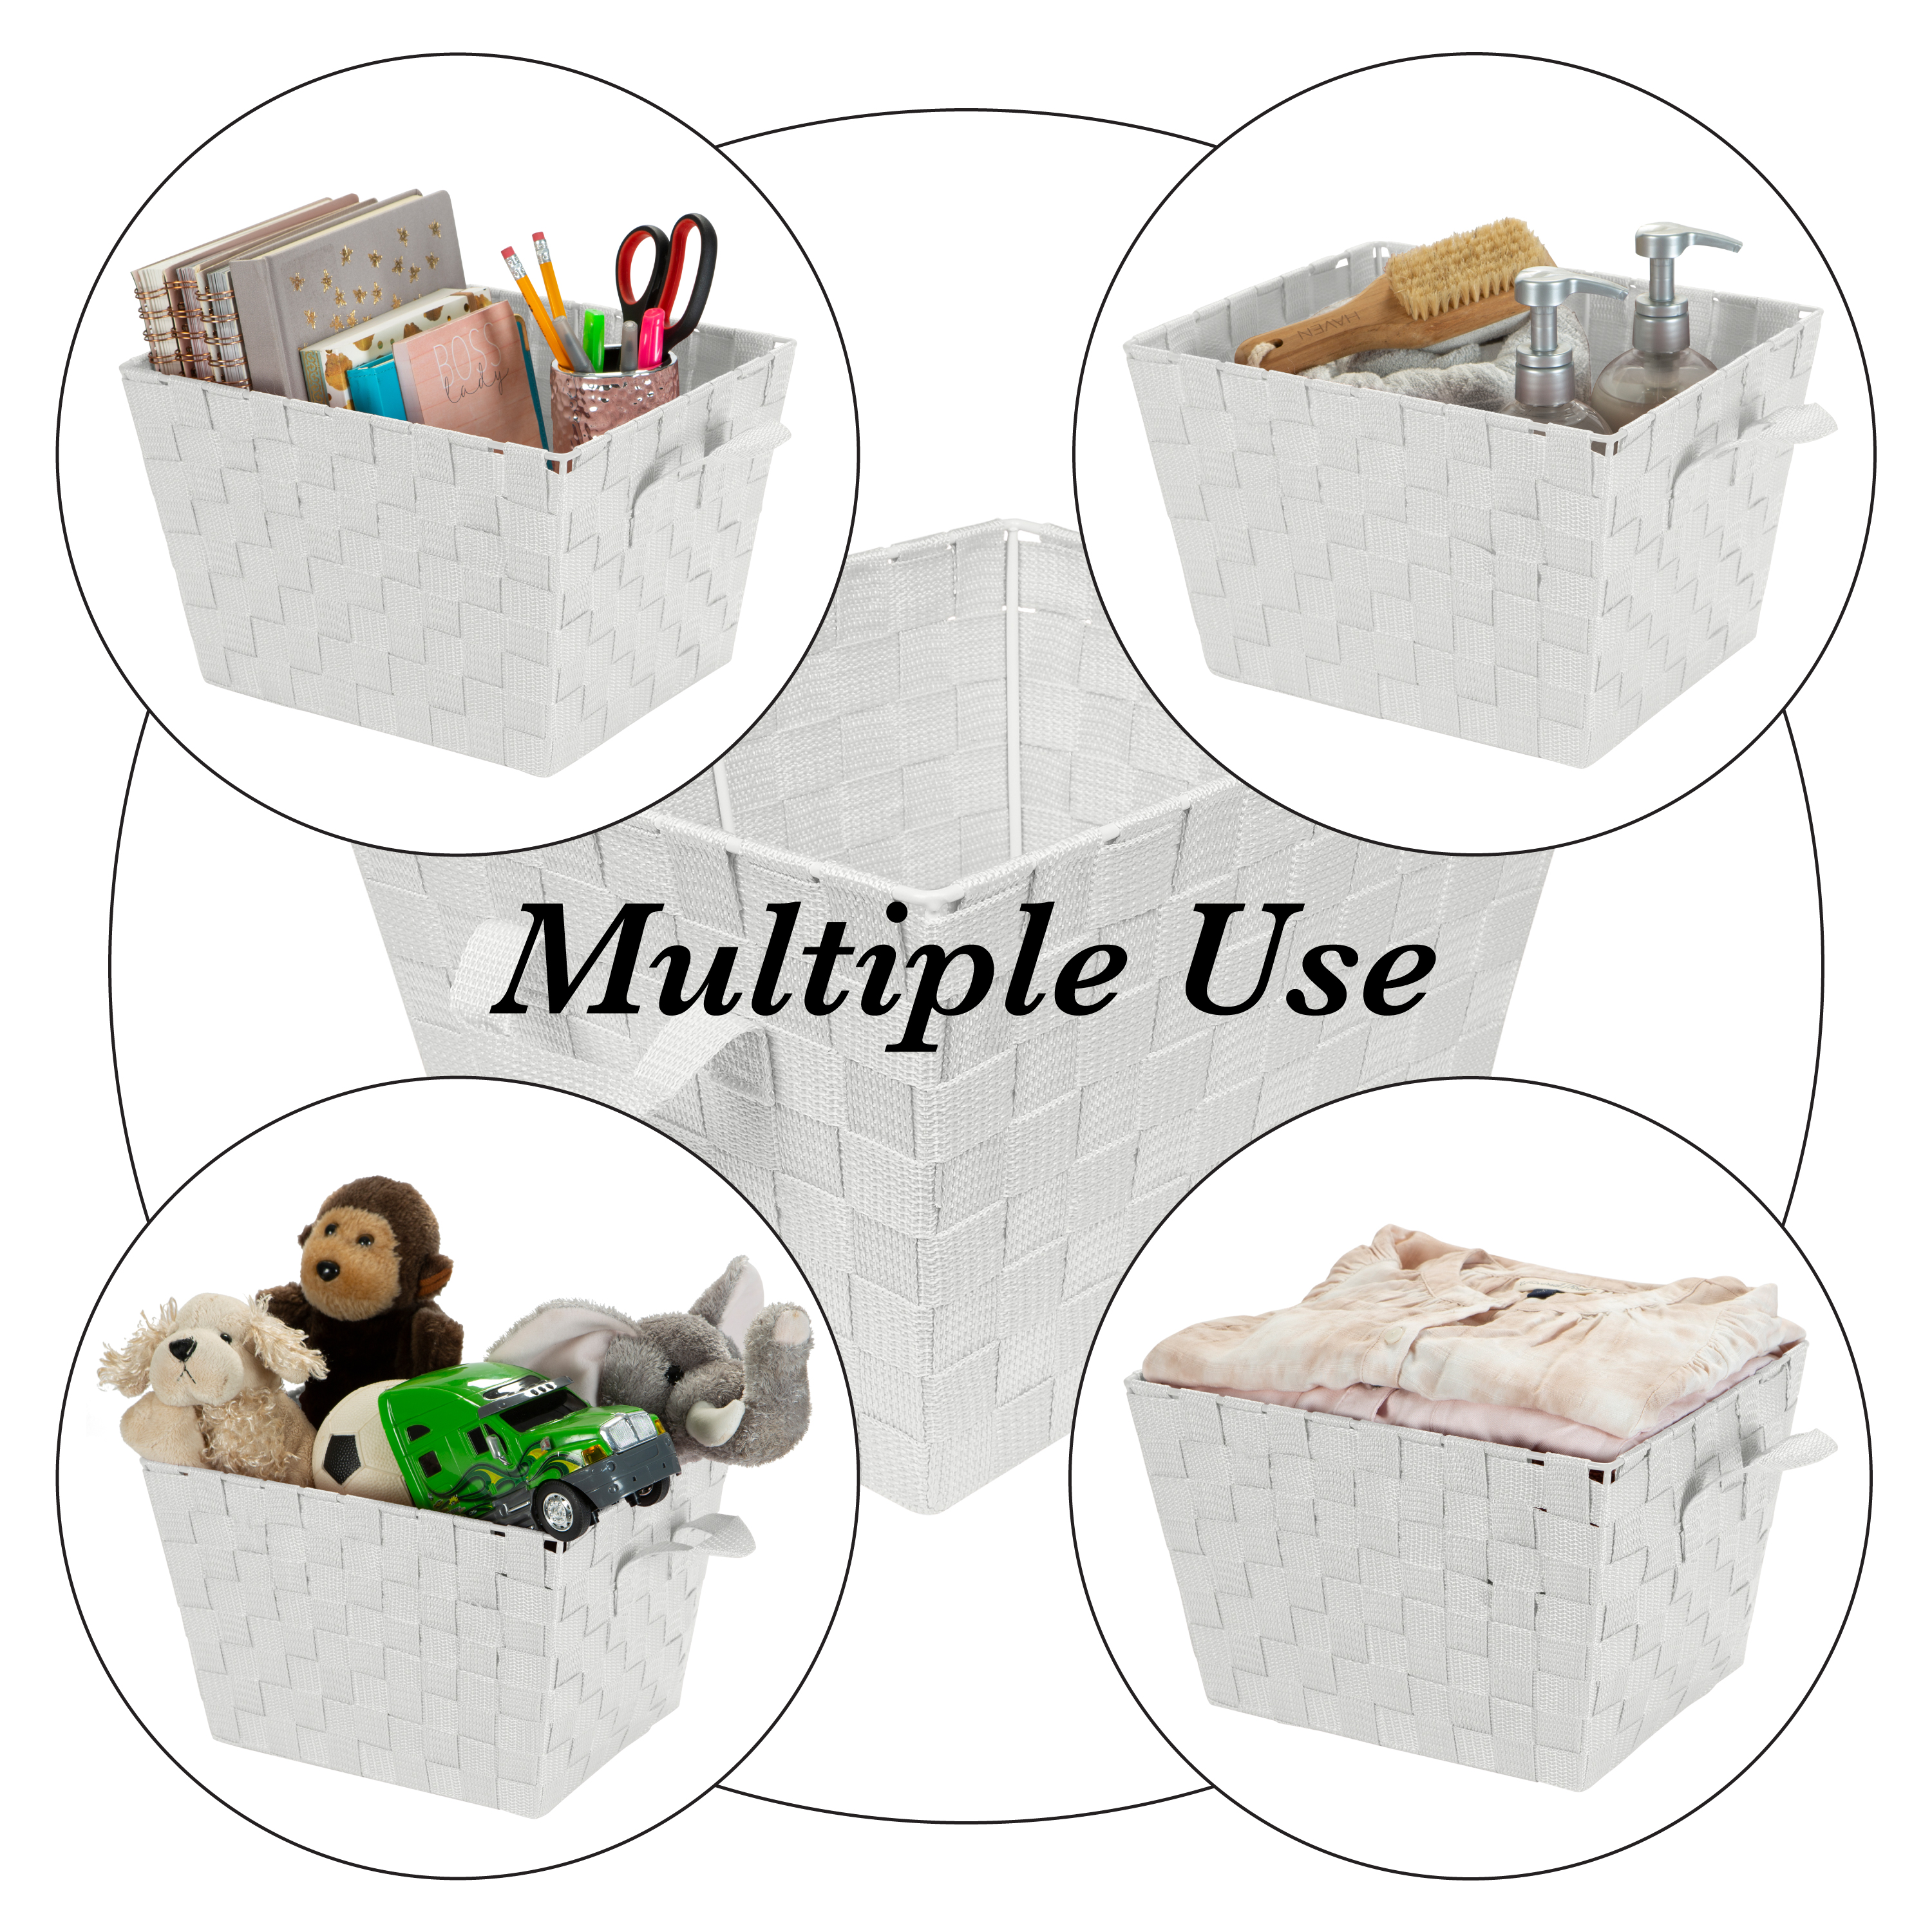 Simplify Small Woven Storage Basket in Grey - image 4 of 7